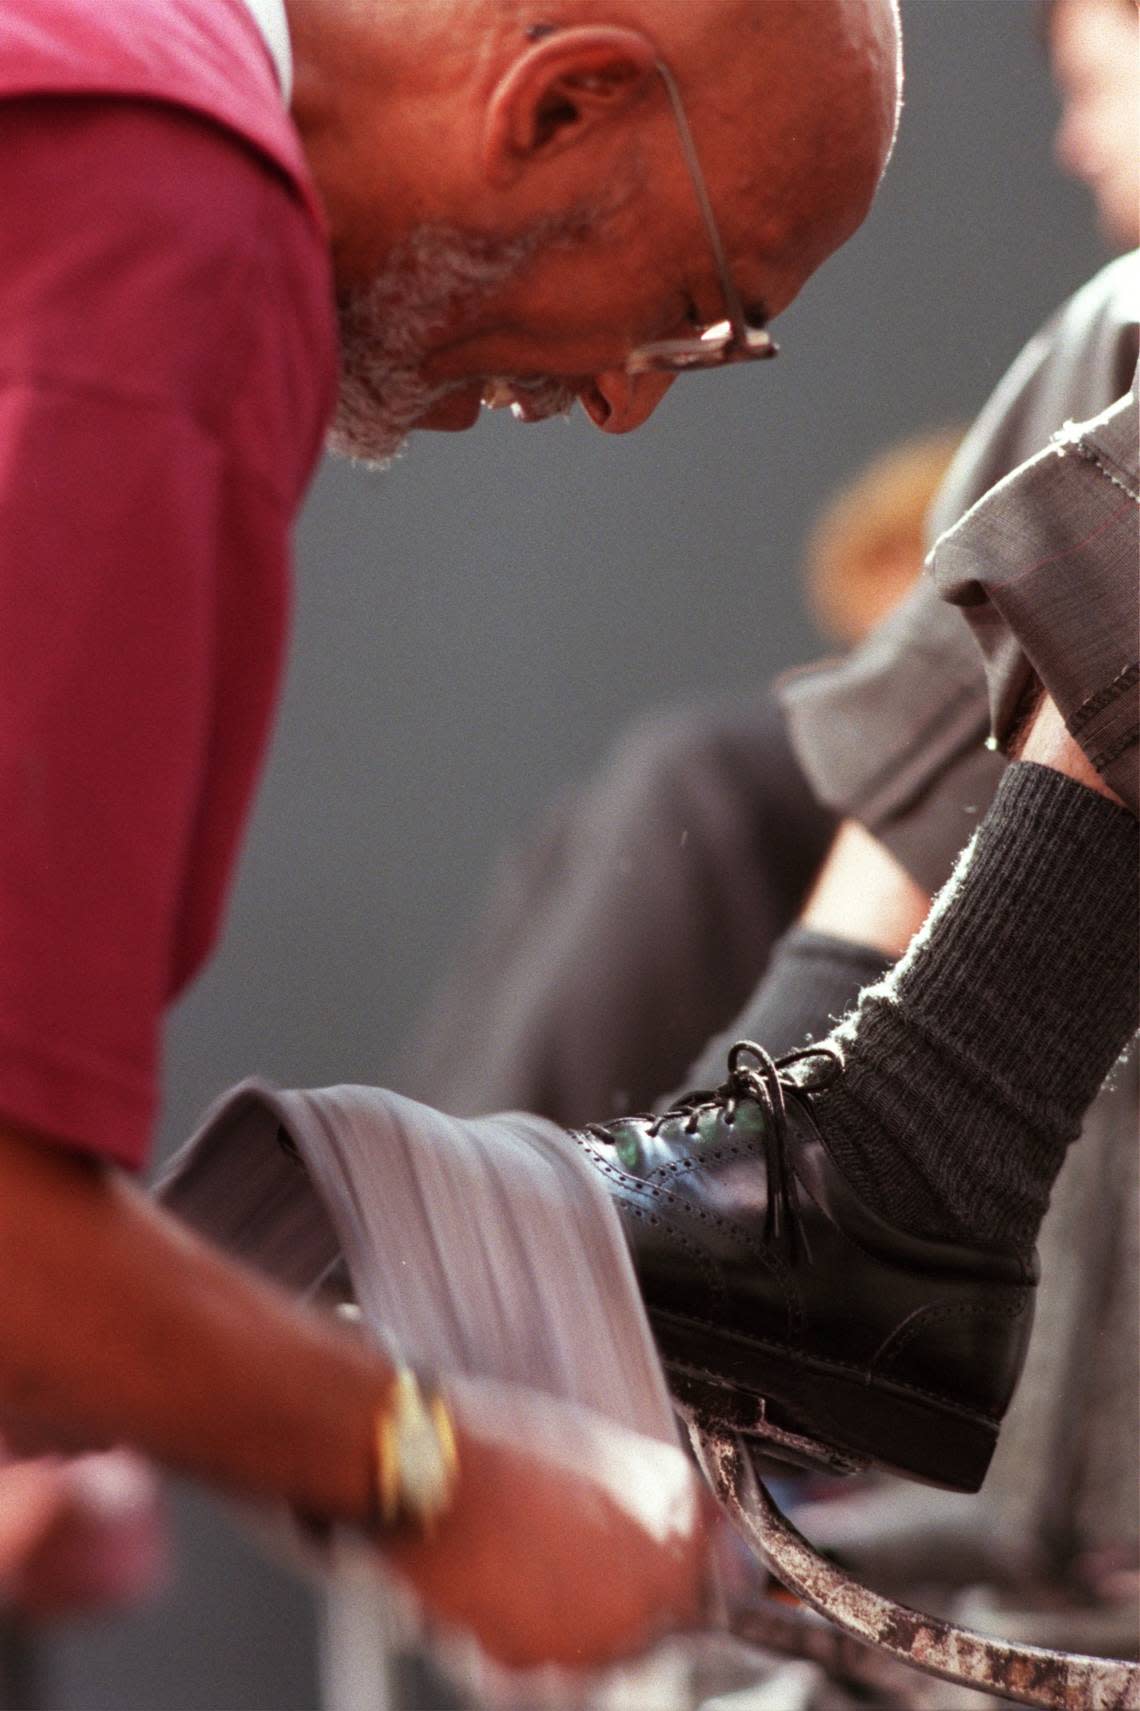 Isaac Bryant putts a shine on a customer’s shoes with a buffing cloth at Superior Shine inside the old Terminal A at Raleigh-Durham International Airport, in this file photo from 1998. Robert Willett/rwillett@newsobserver.com